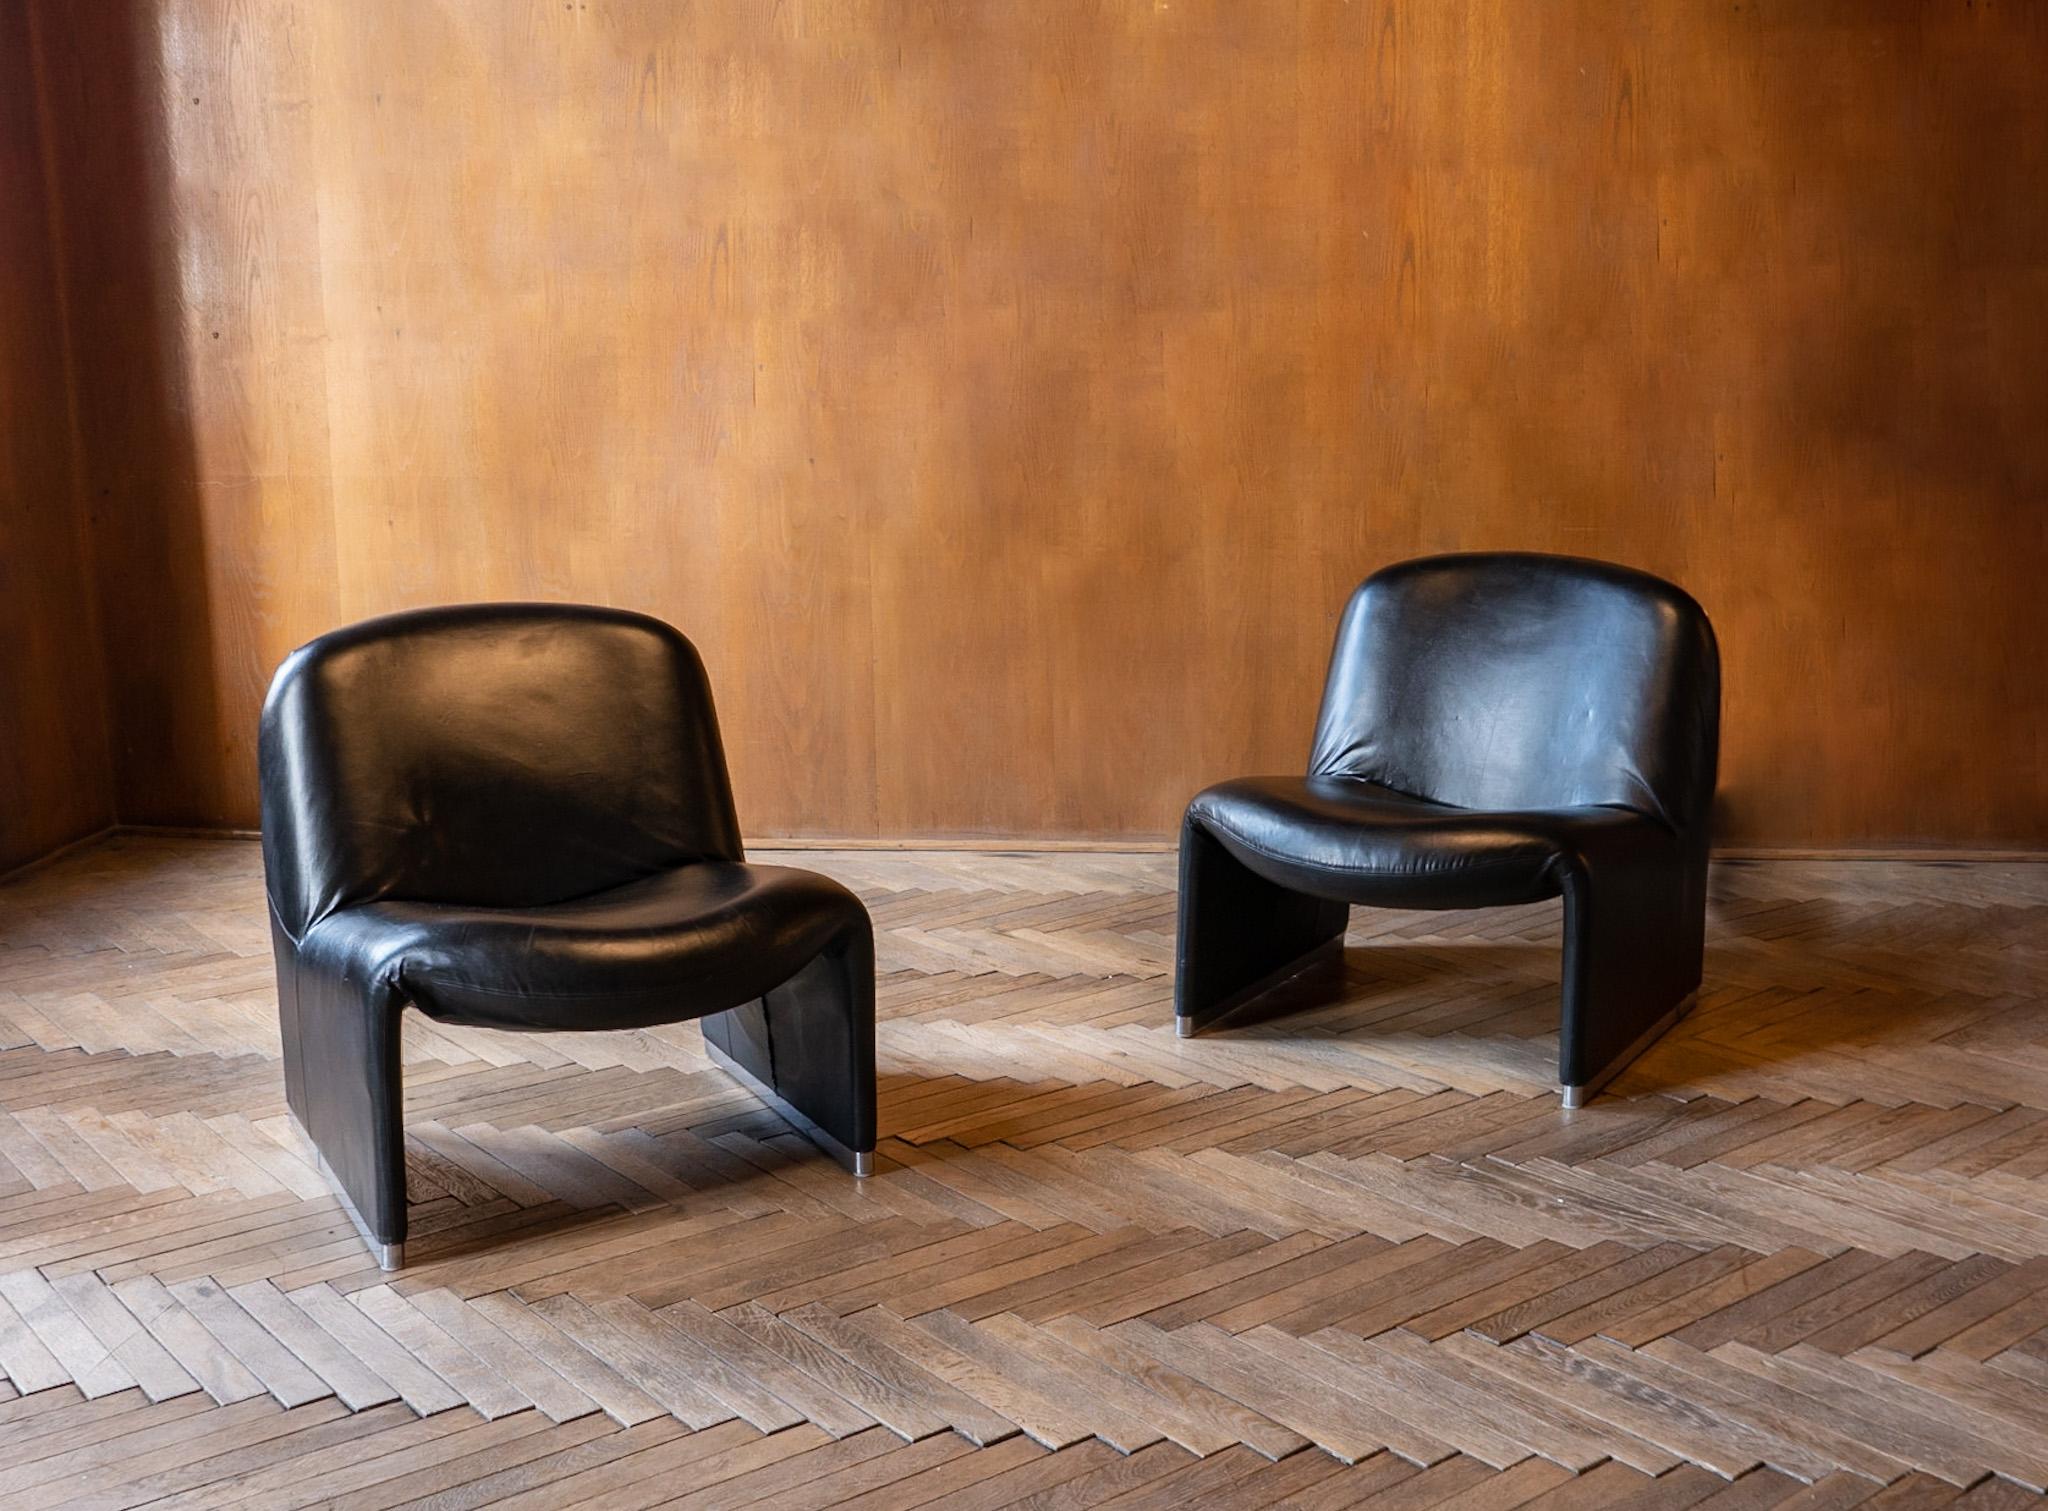 Mid-Century Modern Black Leather Alky Chairs 2 by Giancarlo Piretti, Italy 1970s.

This set of 2 black Alky chairs in original leather upholstery were designed by Giancarlo Piretti for Castelli in the 1970s.

The Alky chair is a stunning example